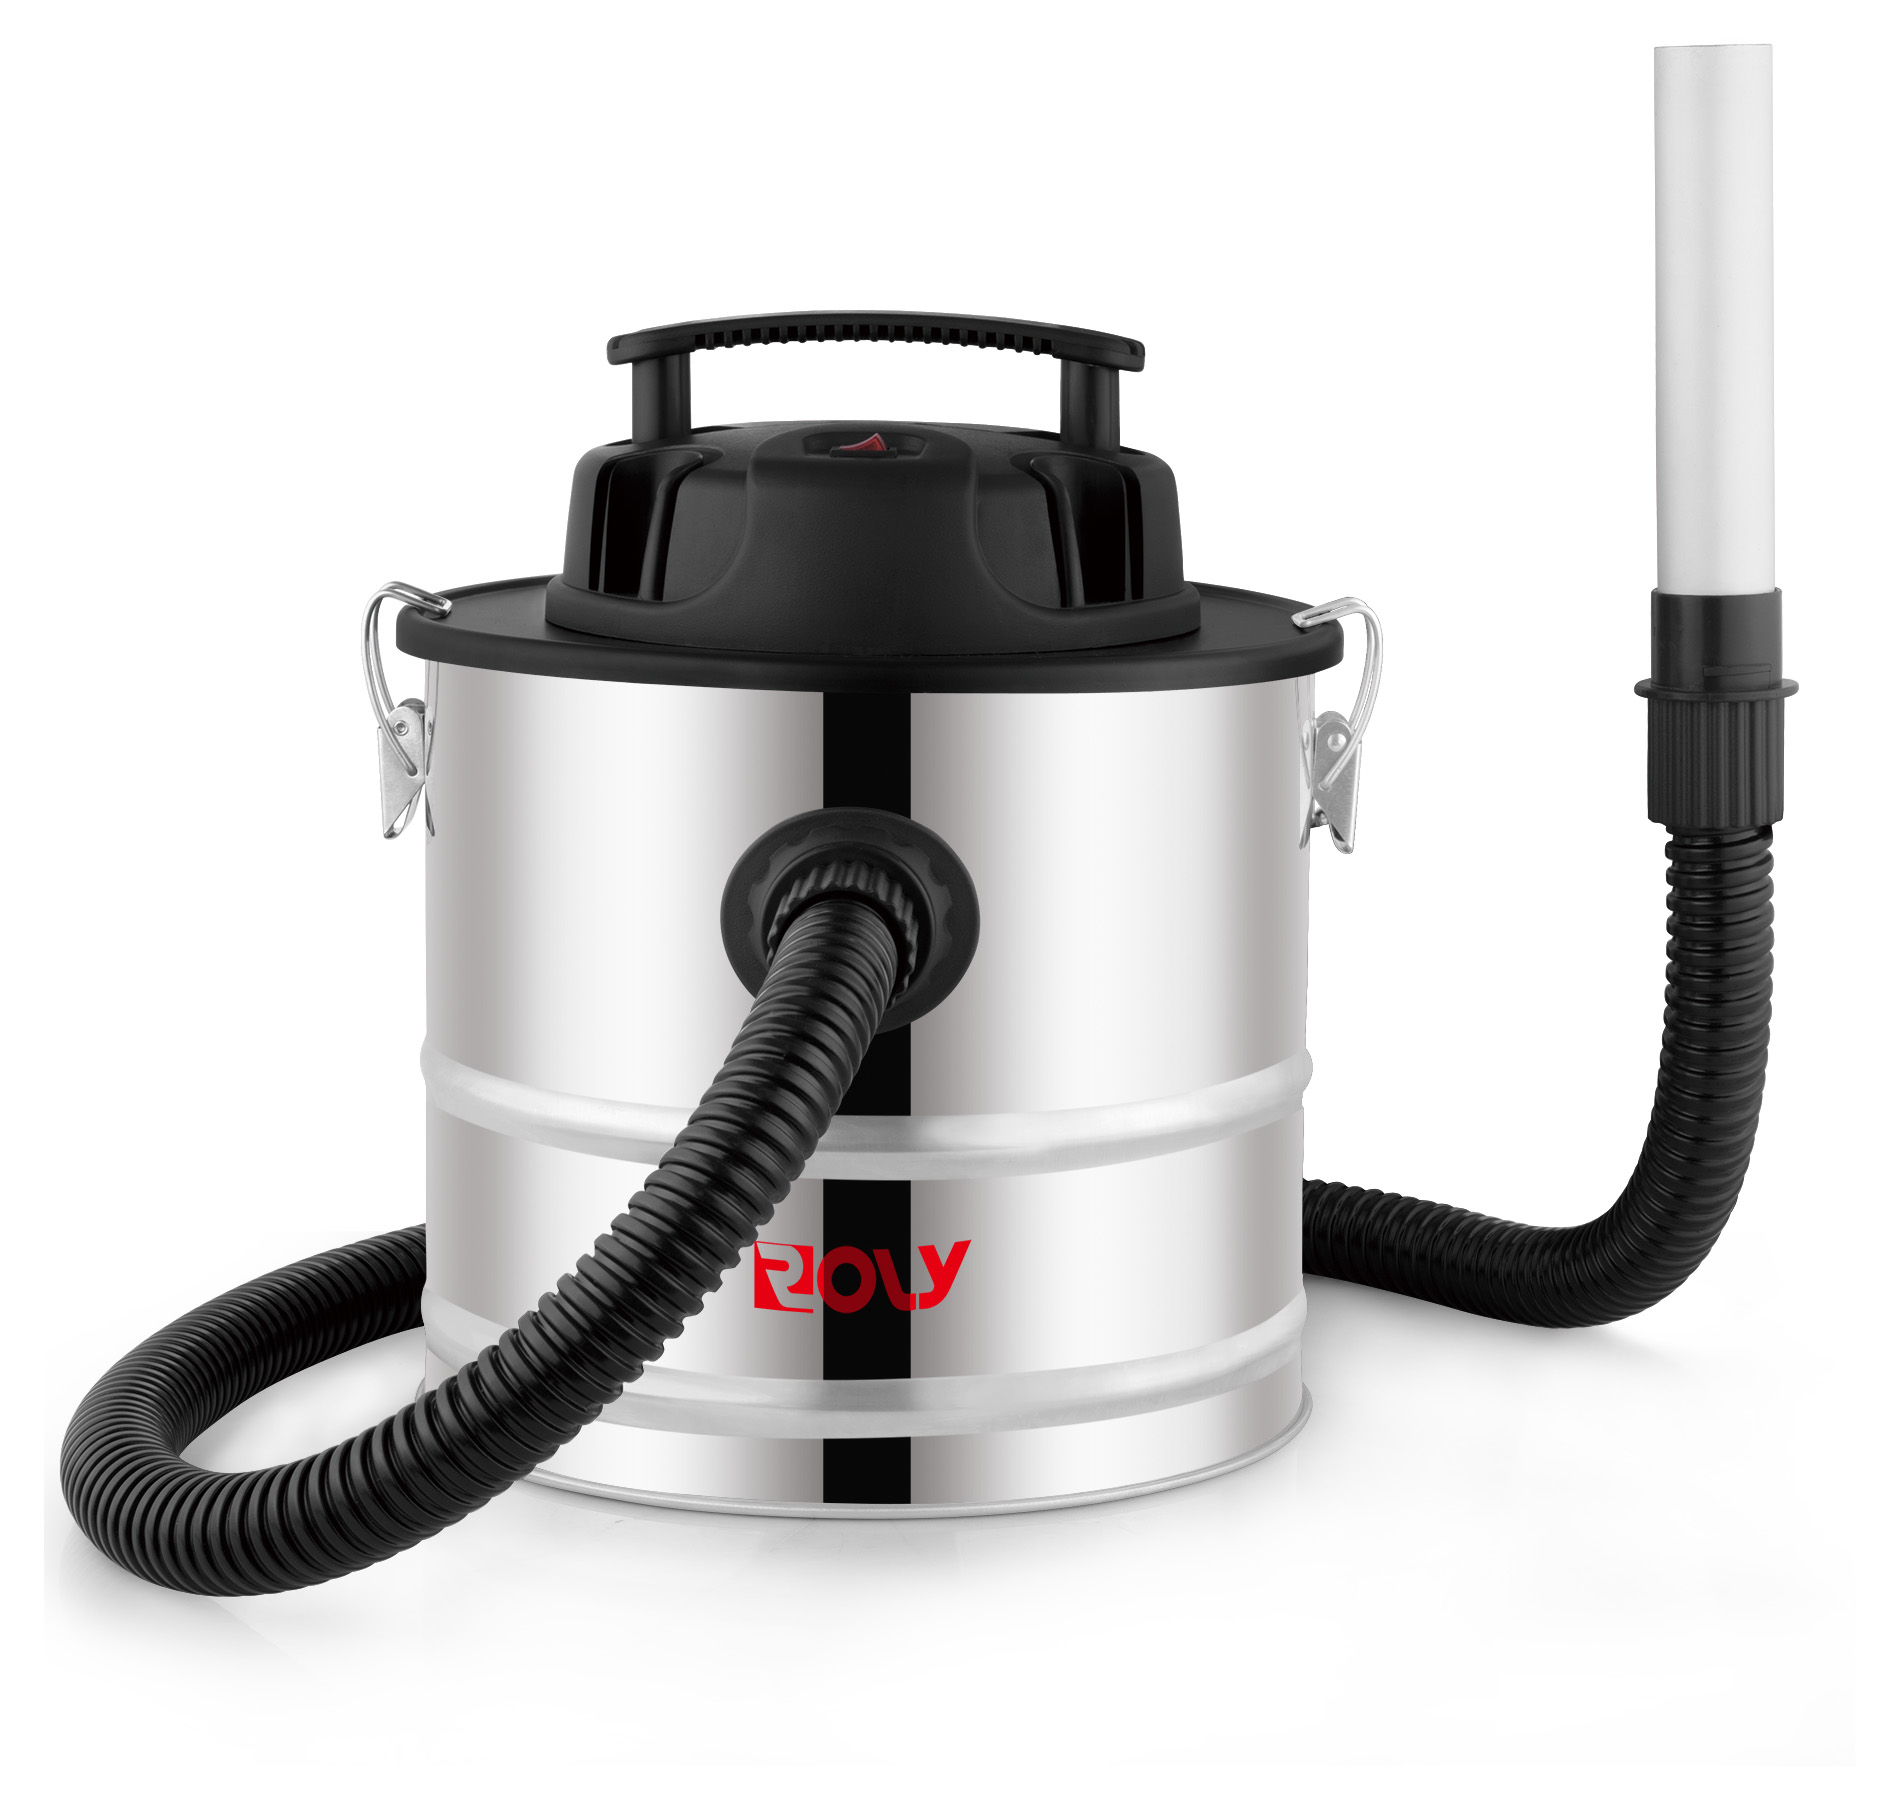 RL132 bbq use stainless steel ash cleaner for hot ashes